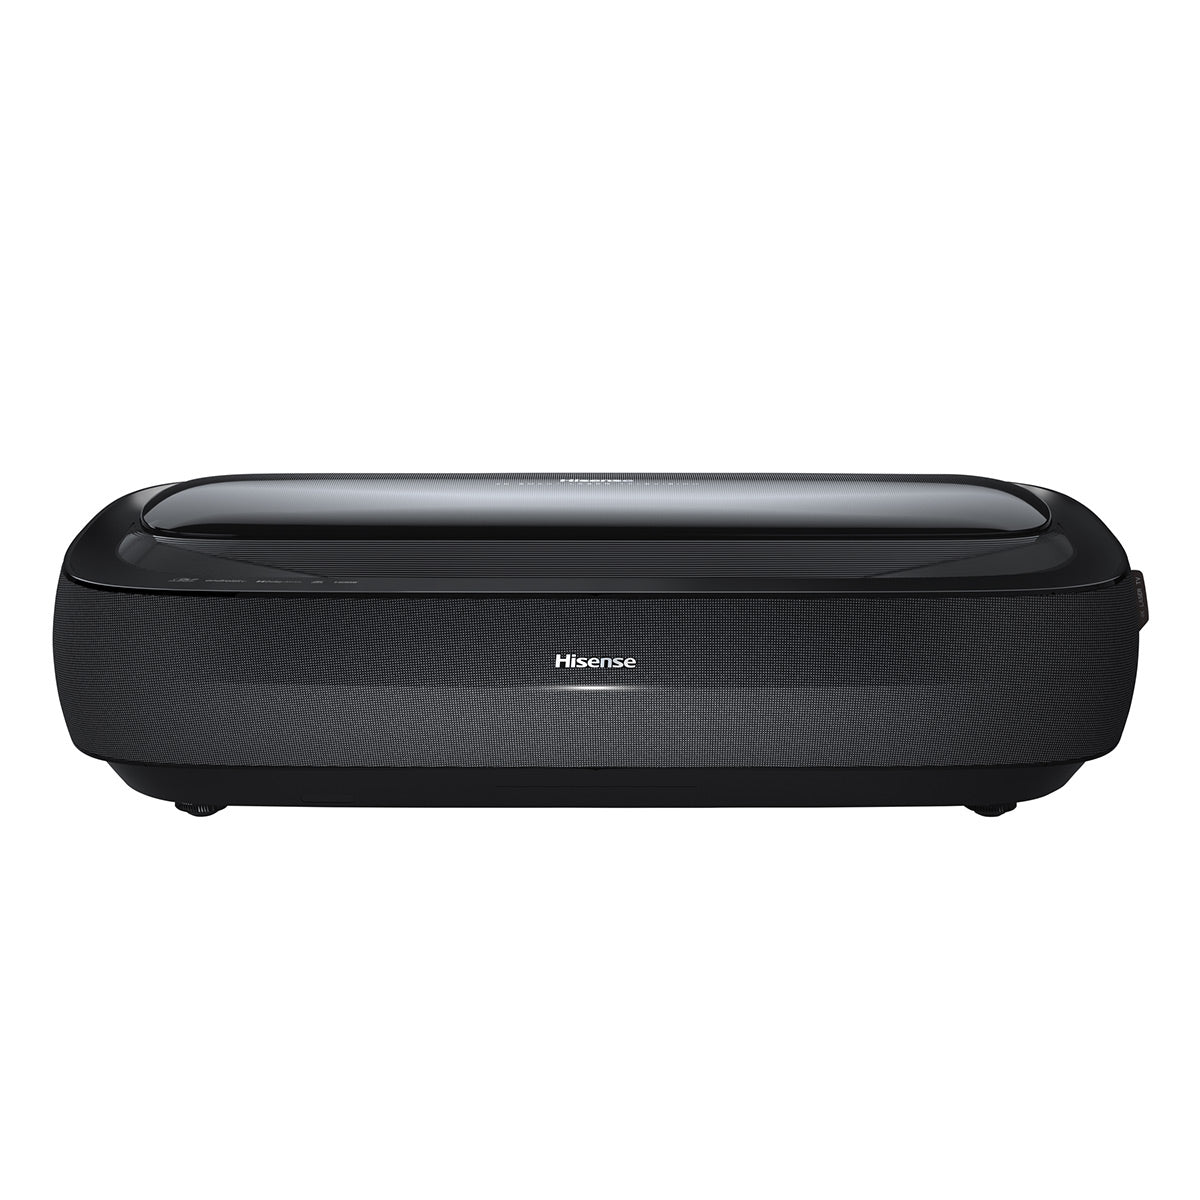 Hisense L9G Laser TV Triple-Laser Ultra Short Throw Projector with